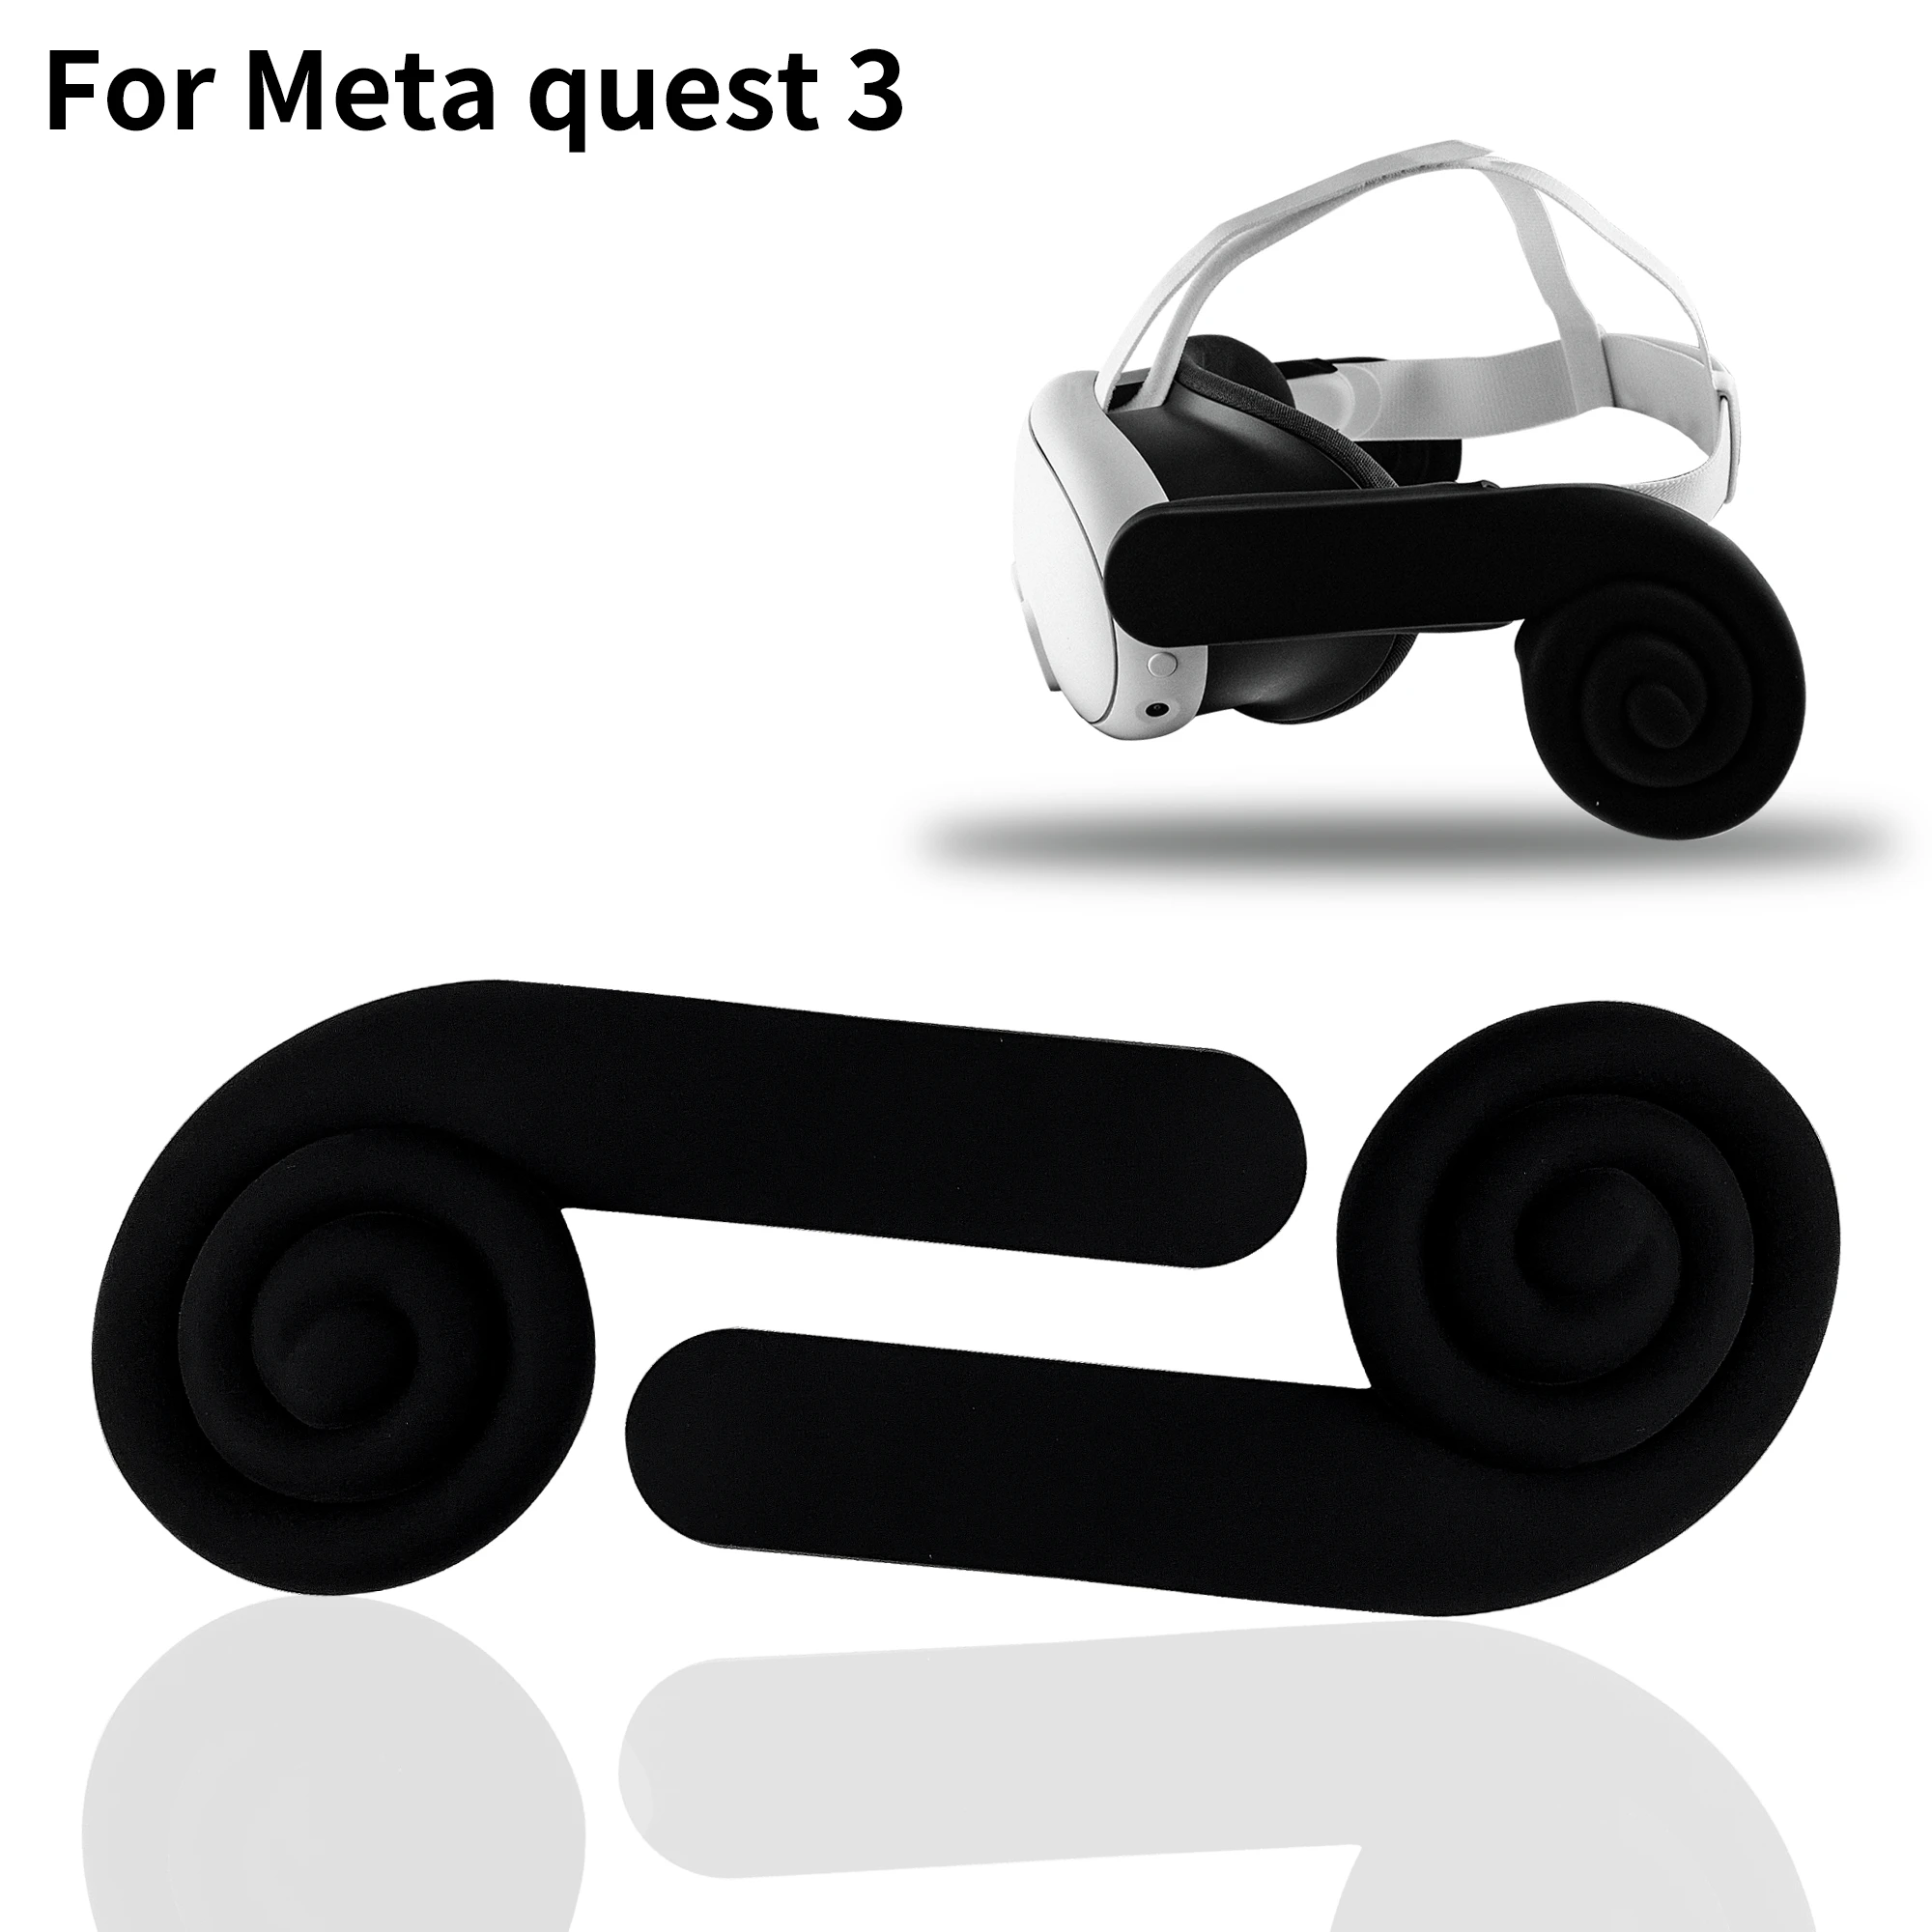 

2 PCS Black/White Volume Collector Earmuffs VR Headset Accessories for Meta quest3